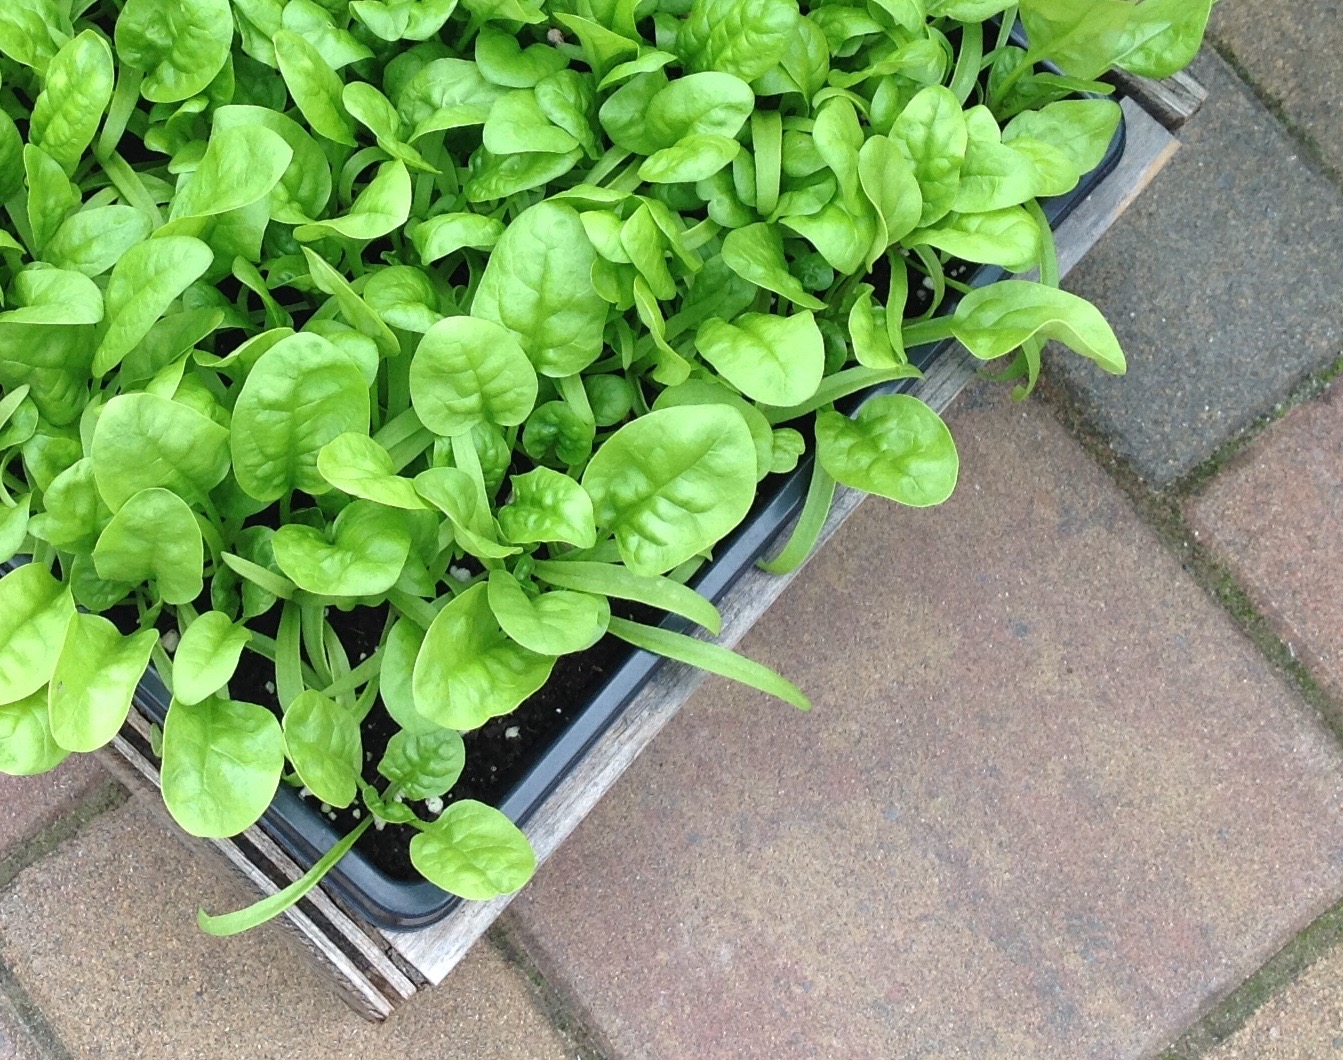 Spinach grown in a container outdoors